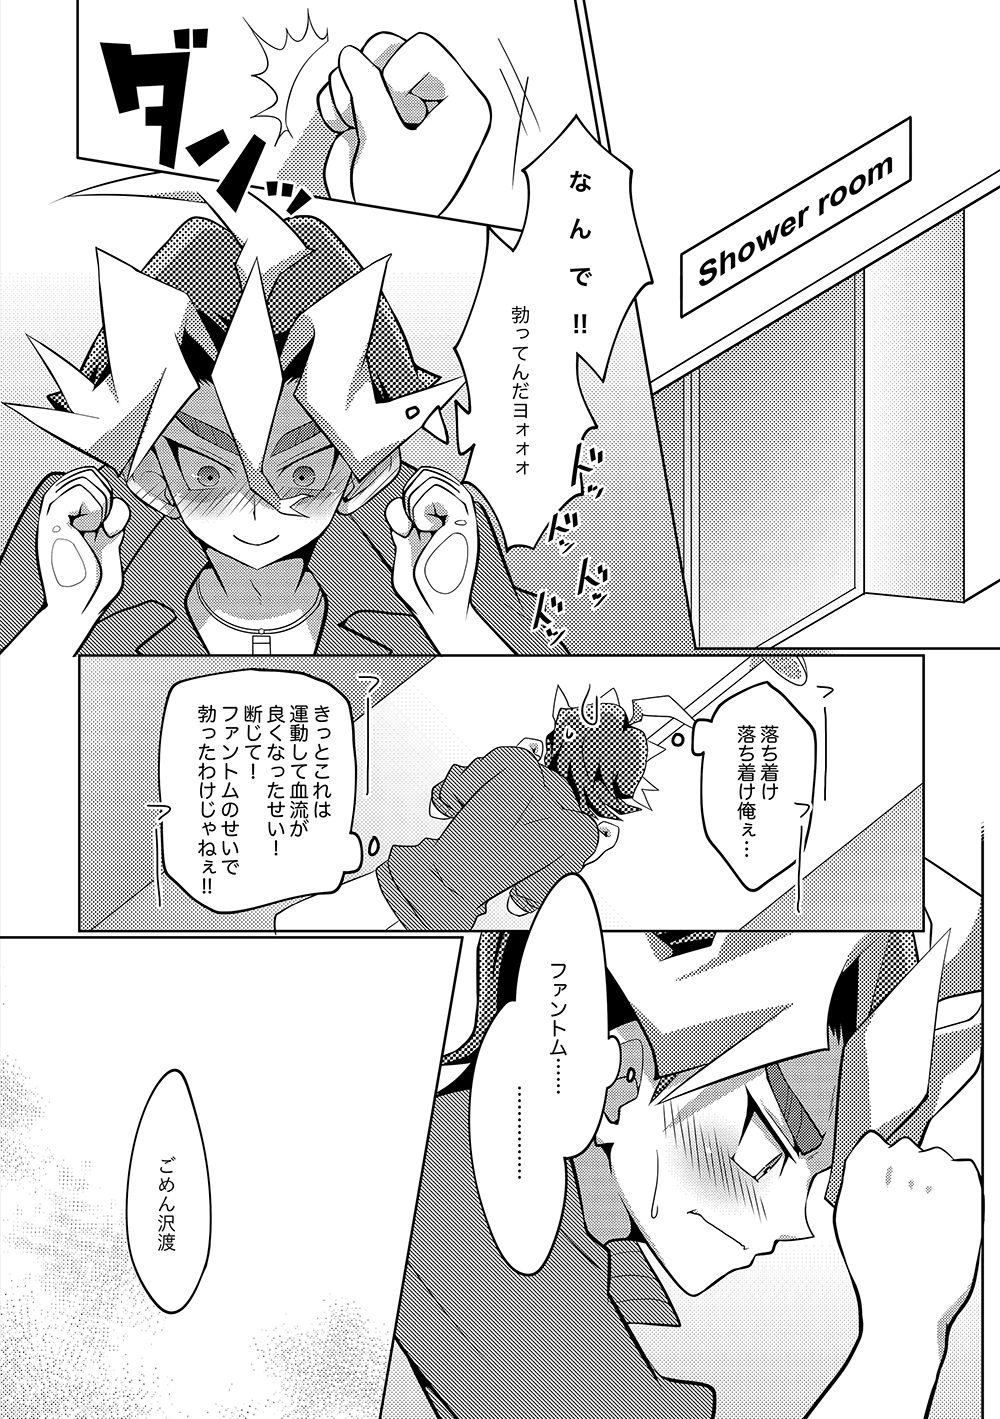 Blackmail SxS H! ANOTHER - Yu gi oh arc v Straight Porn - Page 7